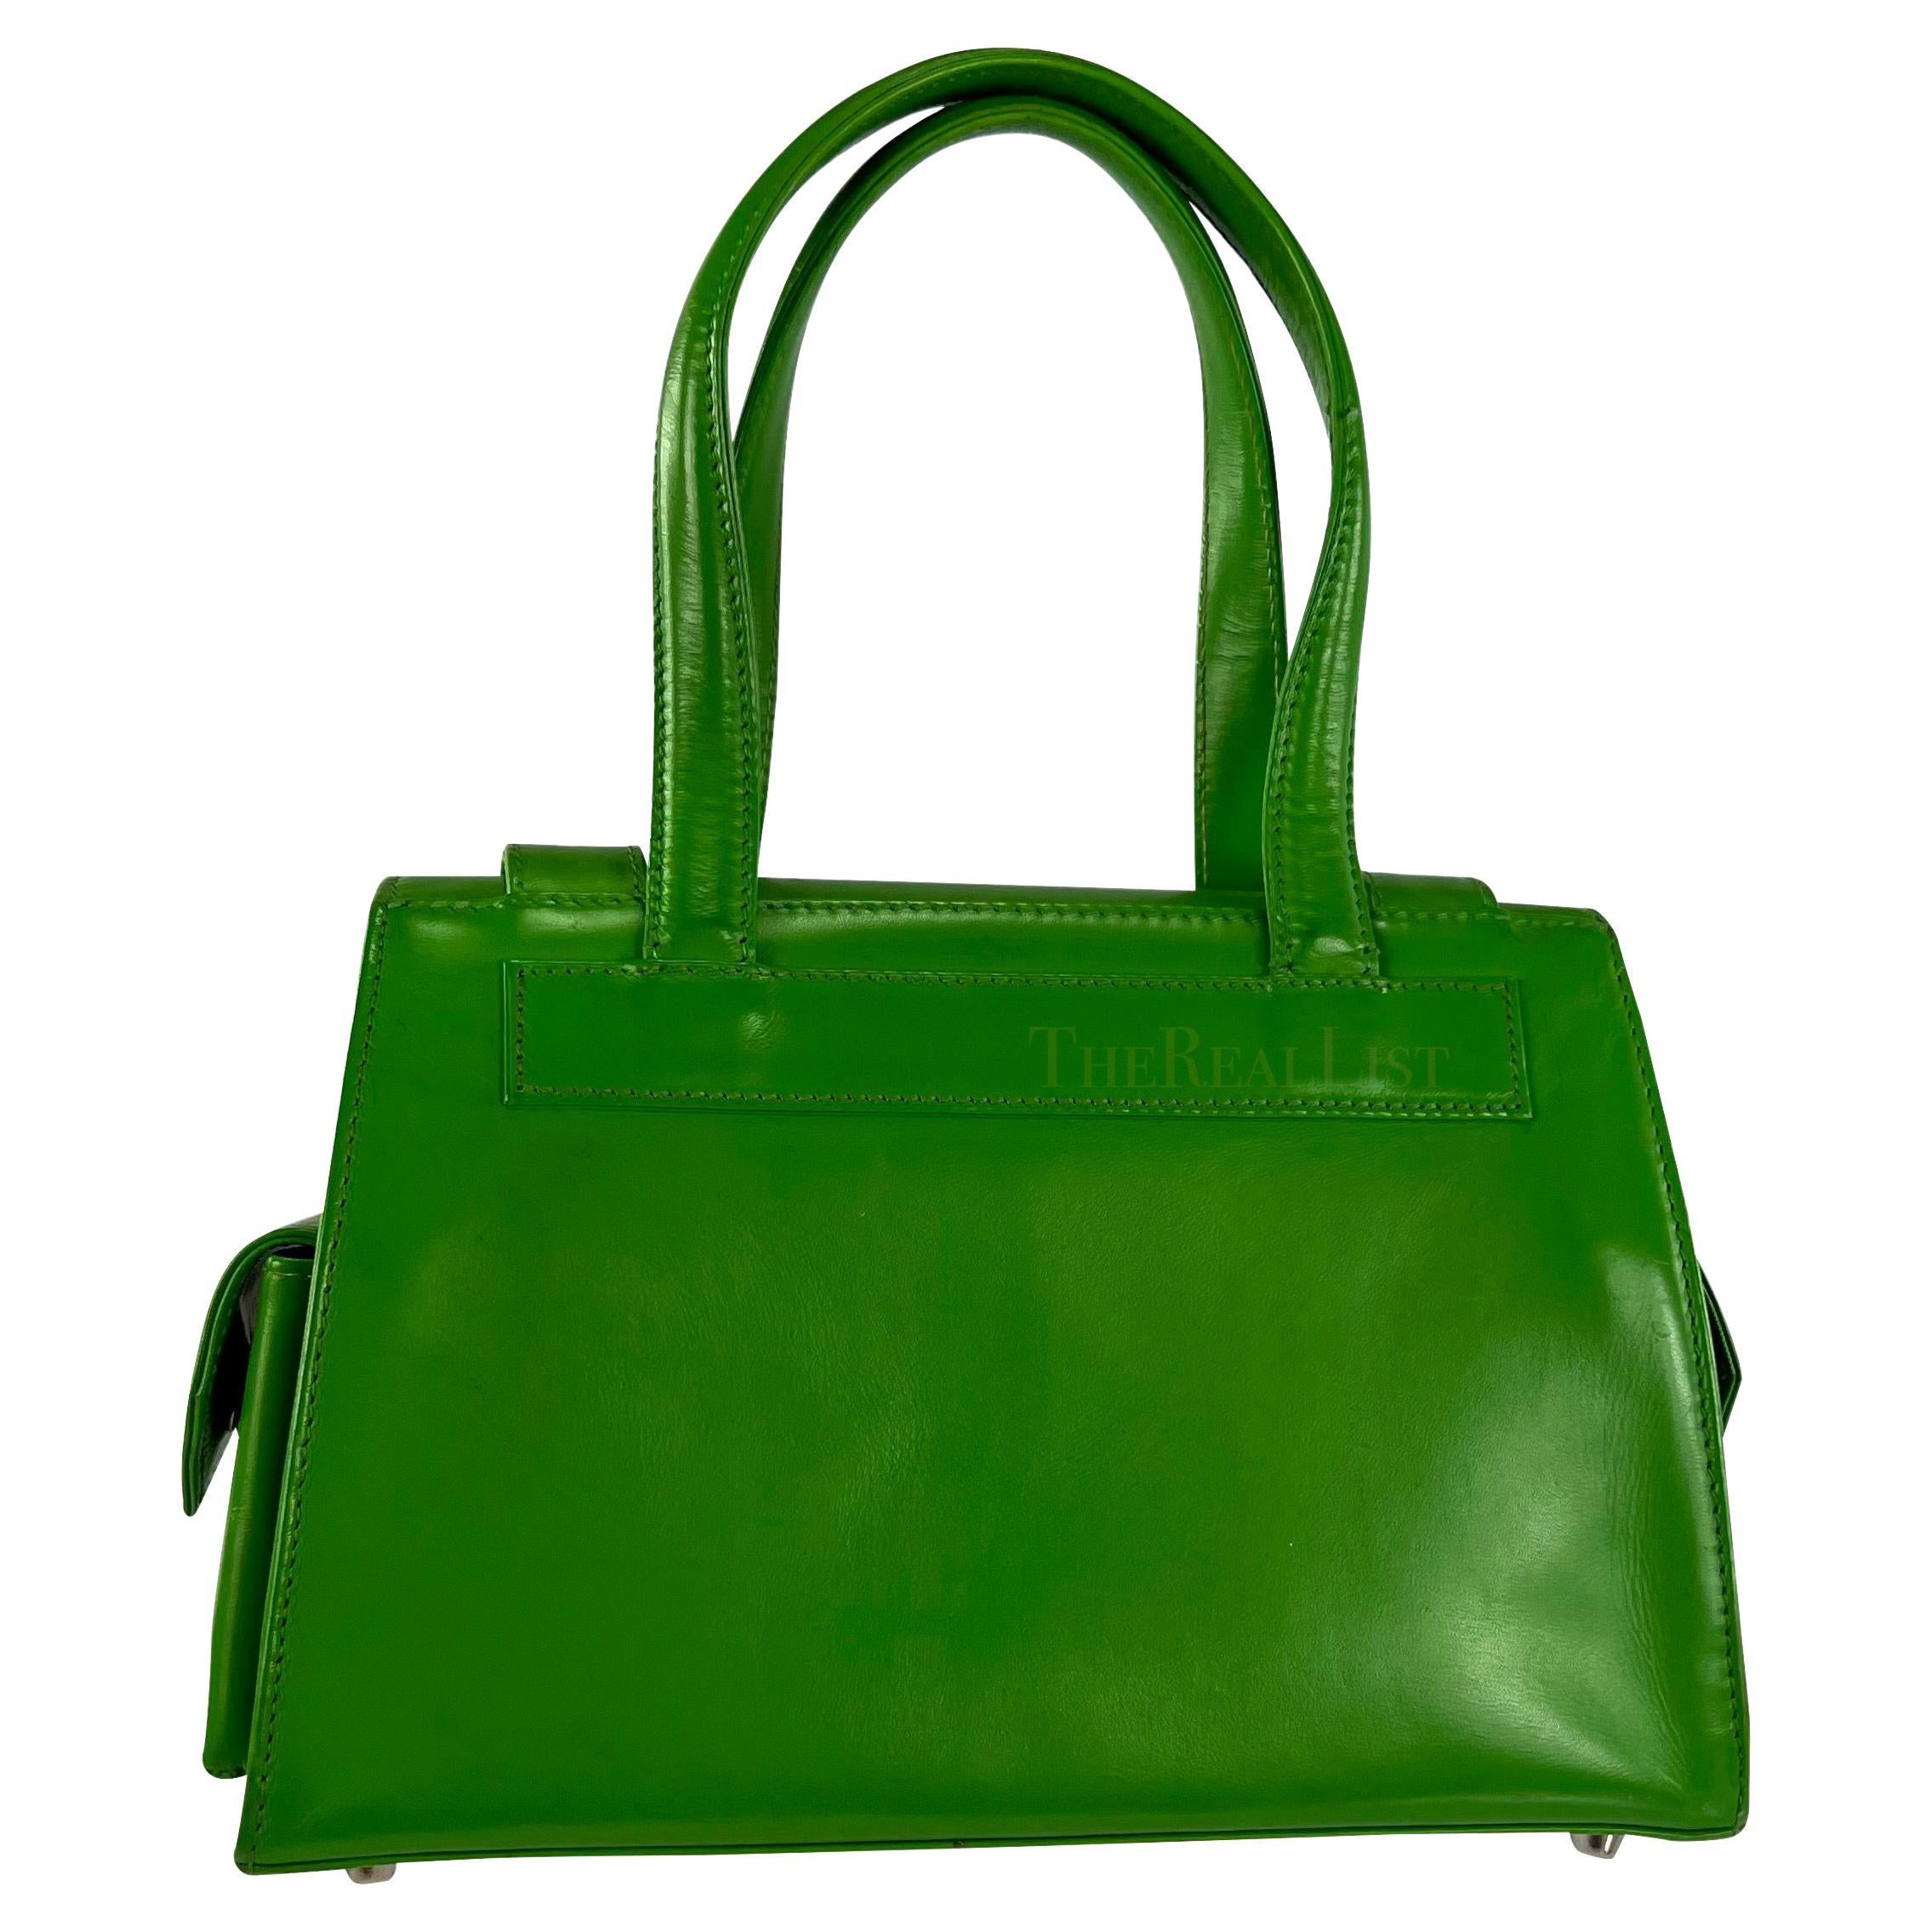 S/S 1994 Gianni Versace Vintage Mini Green Leather Safety Pin Bag In Good Condition For Sale In West Hollywood, CA